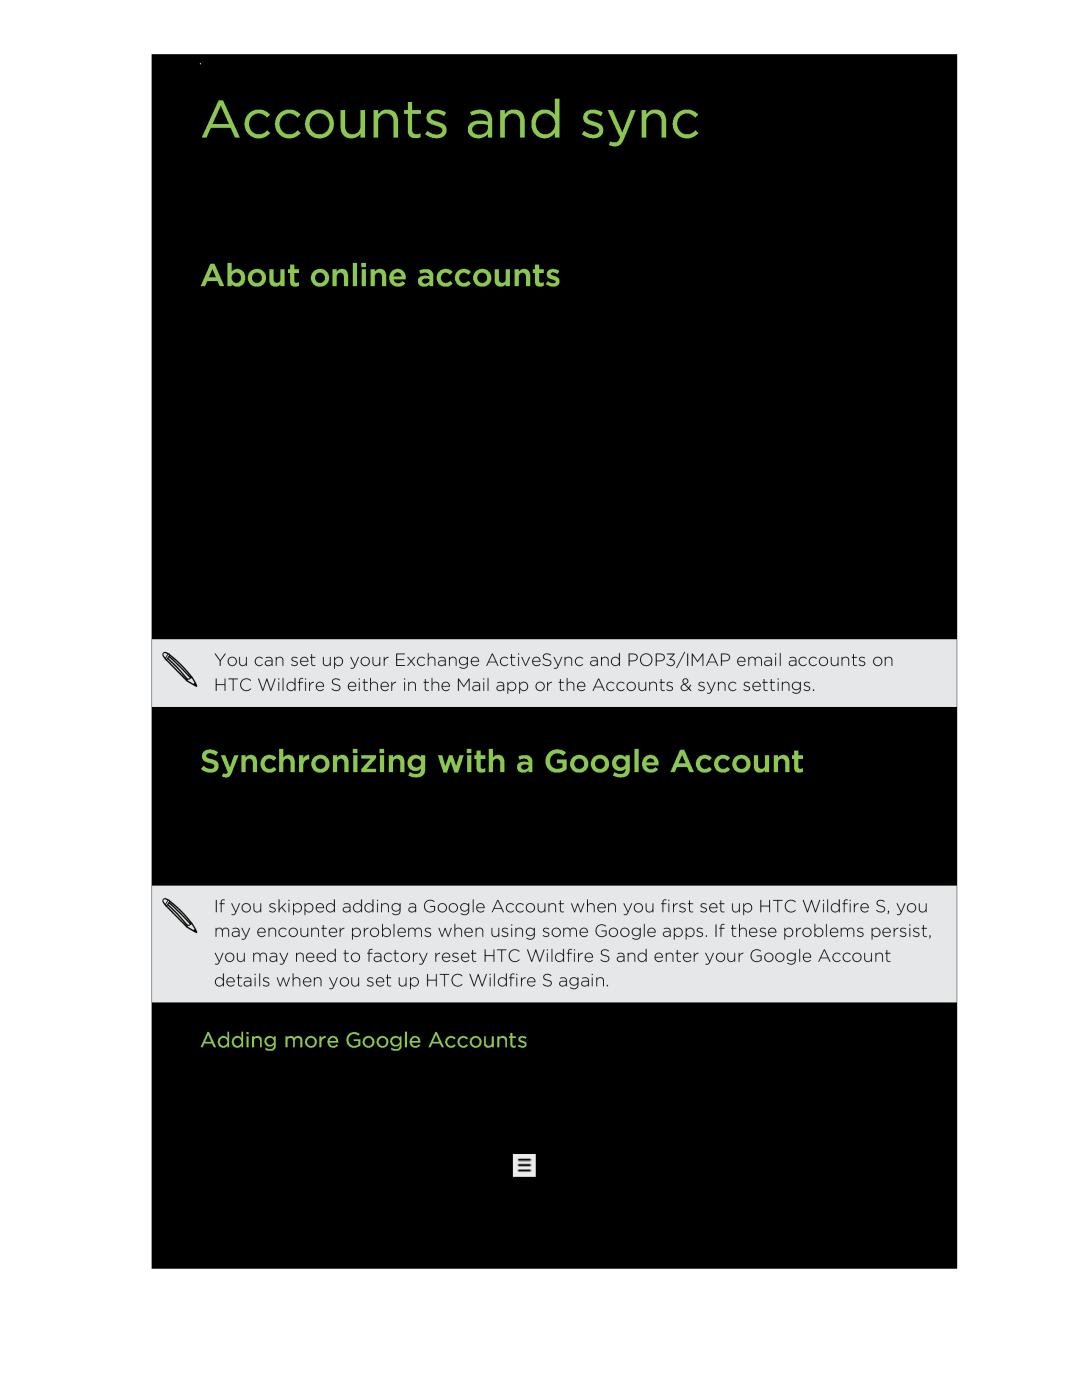 HTC manual Accounts and sync, About online accounts, Synchronizing with a Google Account, Adding more Google Accounts 